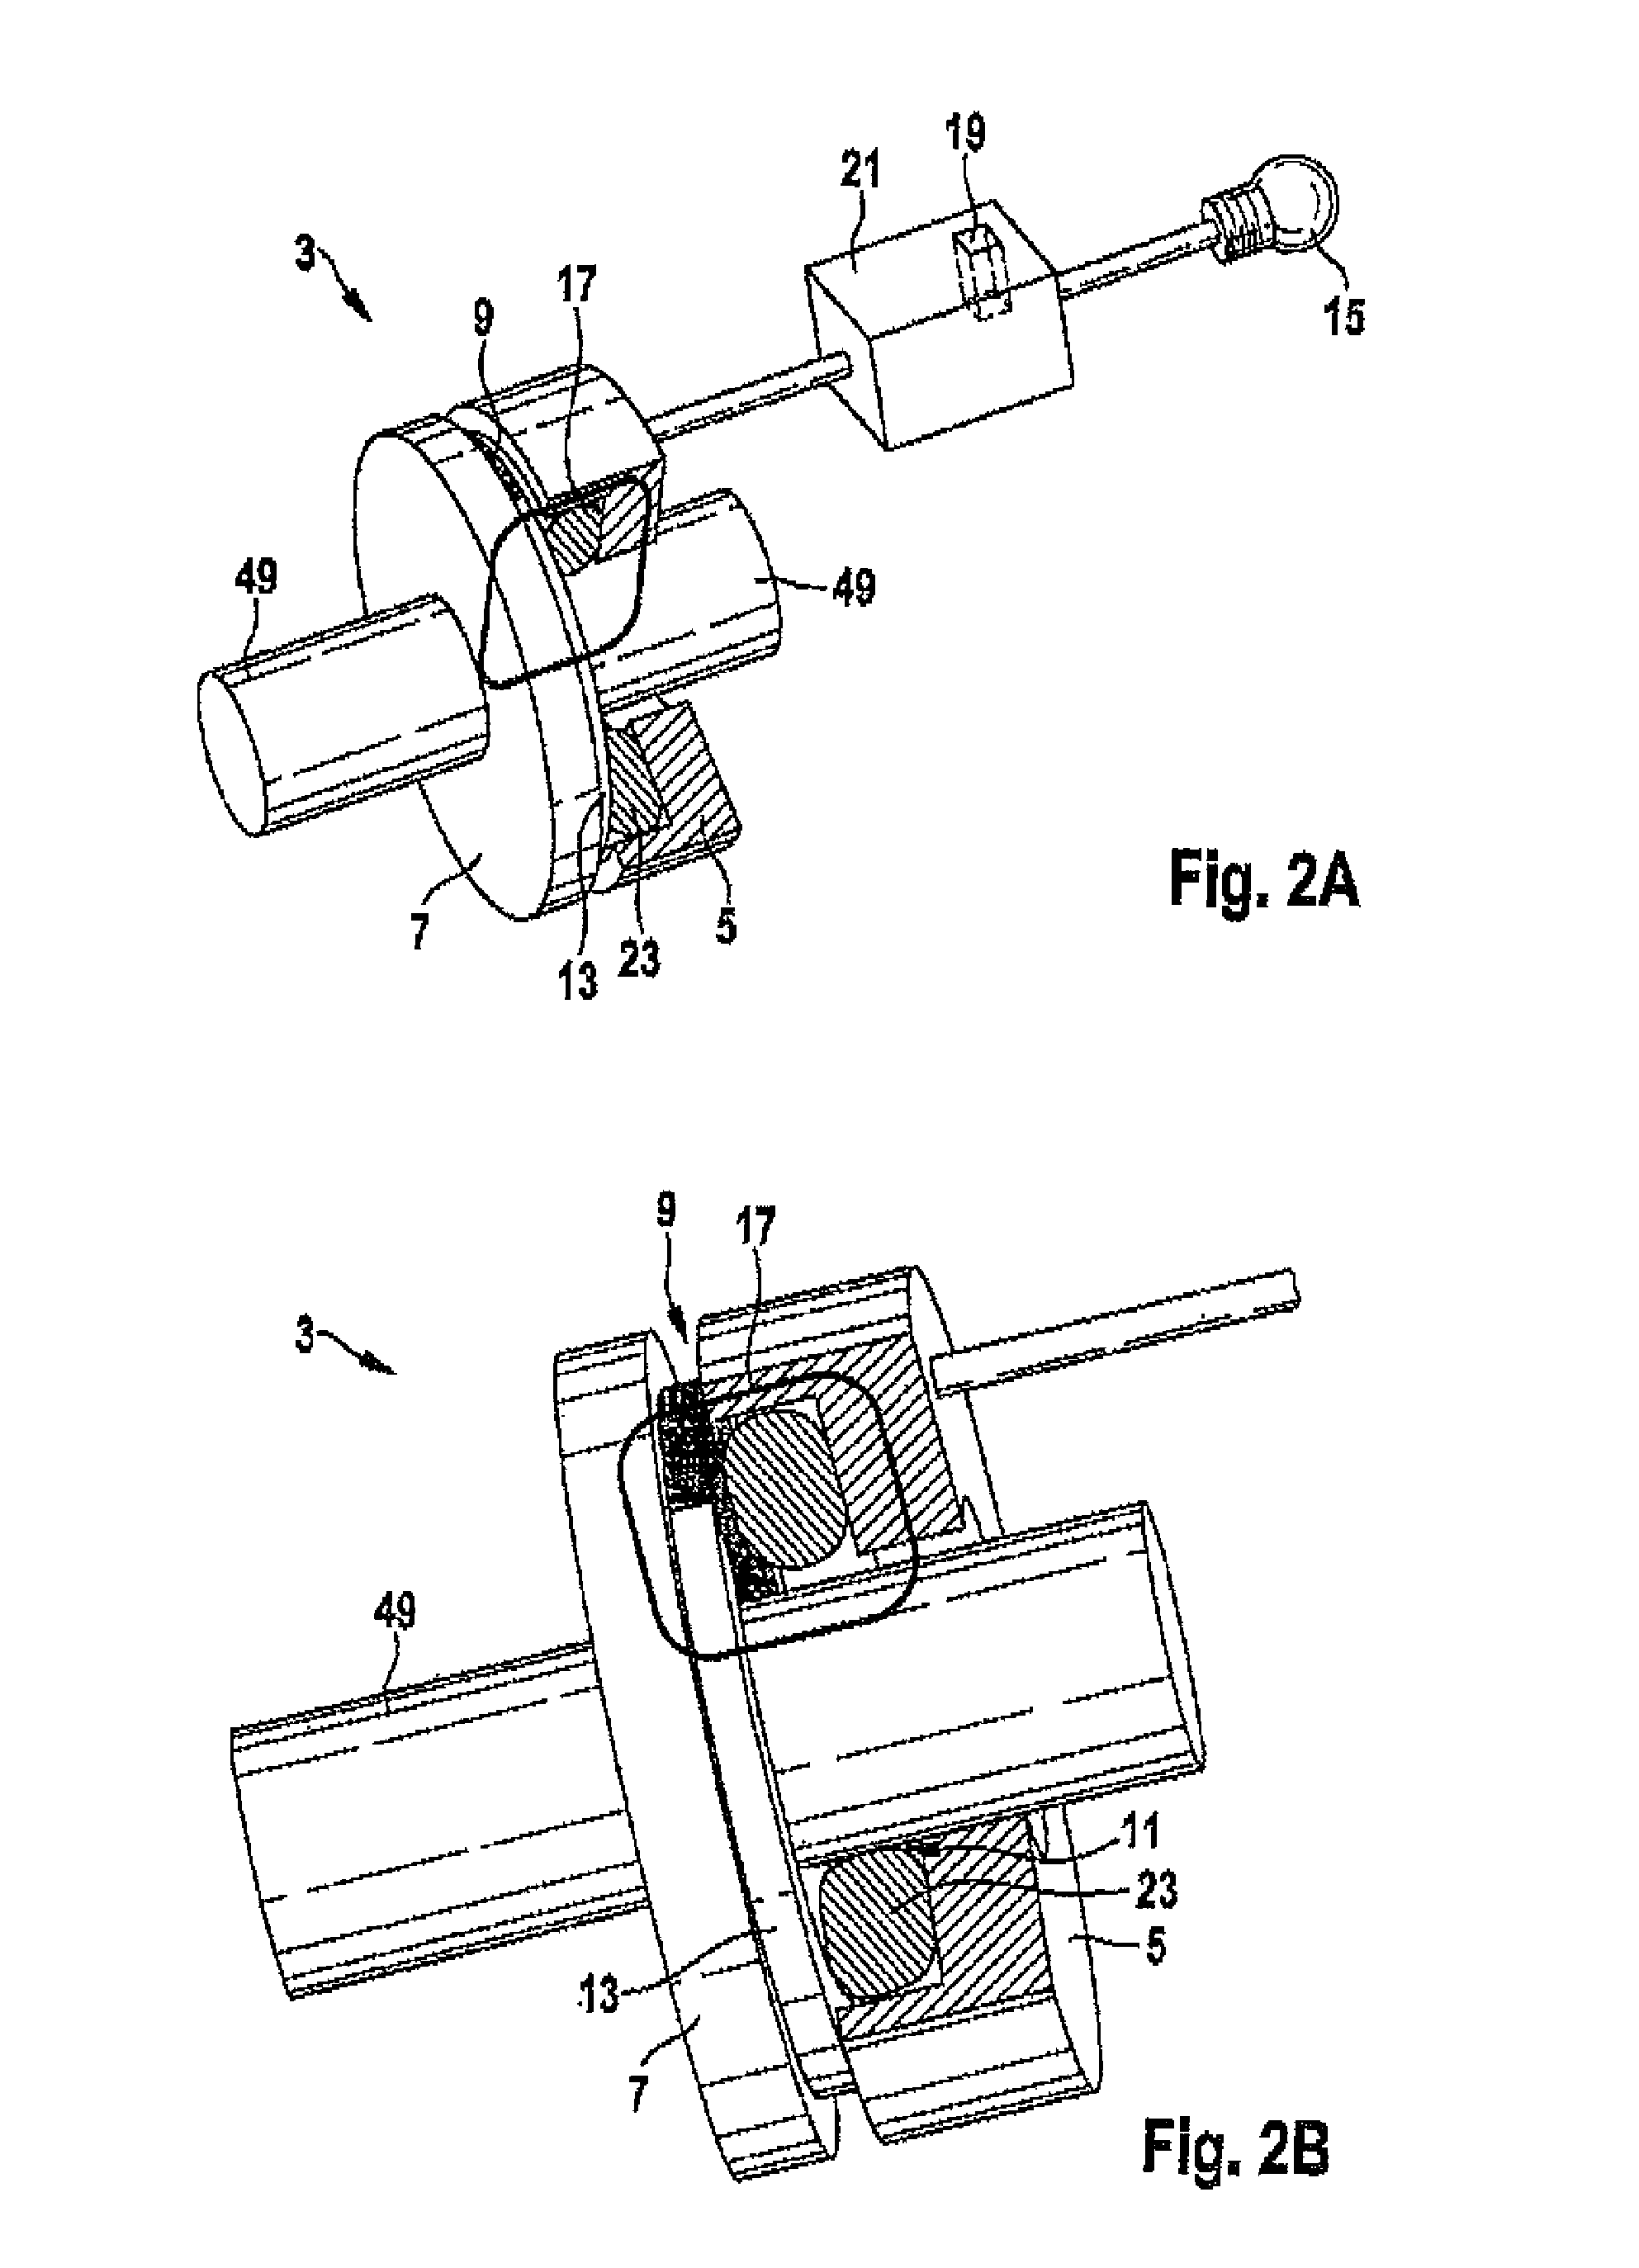 Machine Tool with an Active Electrical Generator for Power Generation